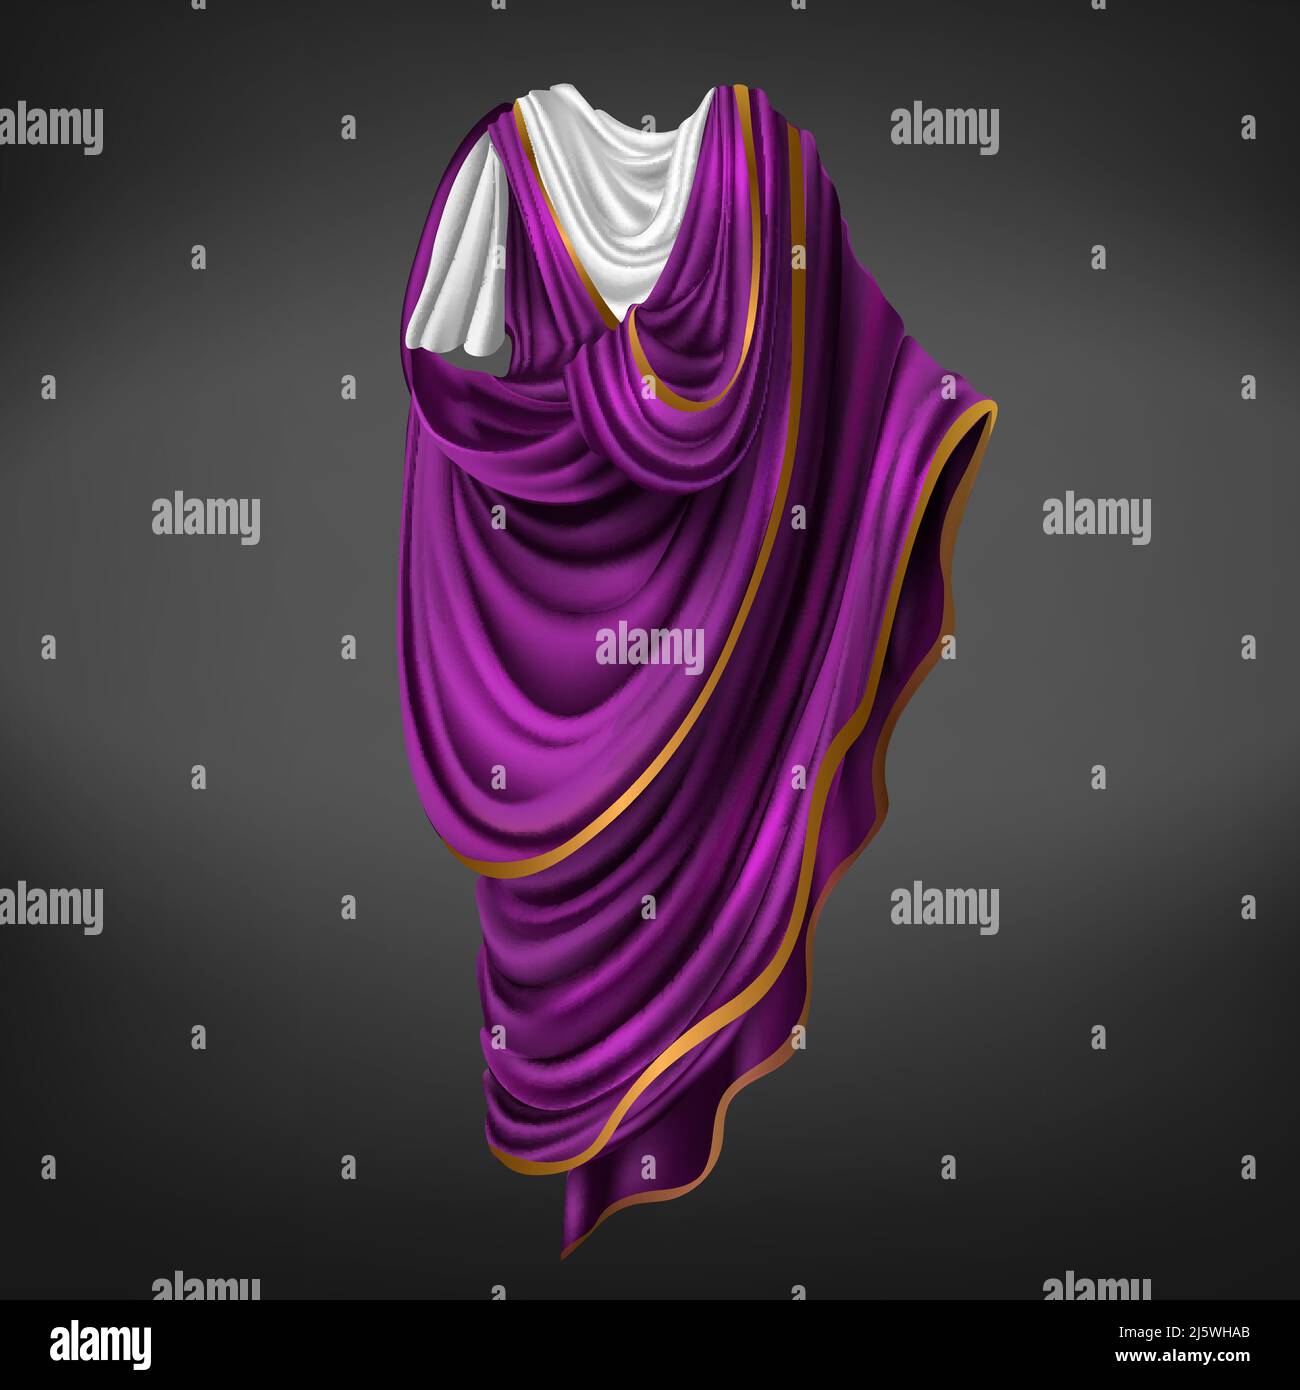 Roman toga. Ancient Rome commander or emperor dress male made of white, purple piece of fabric with golden border draped around body, folded gown, his Stock Vector